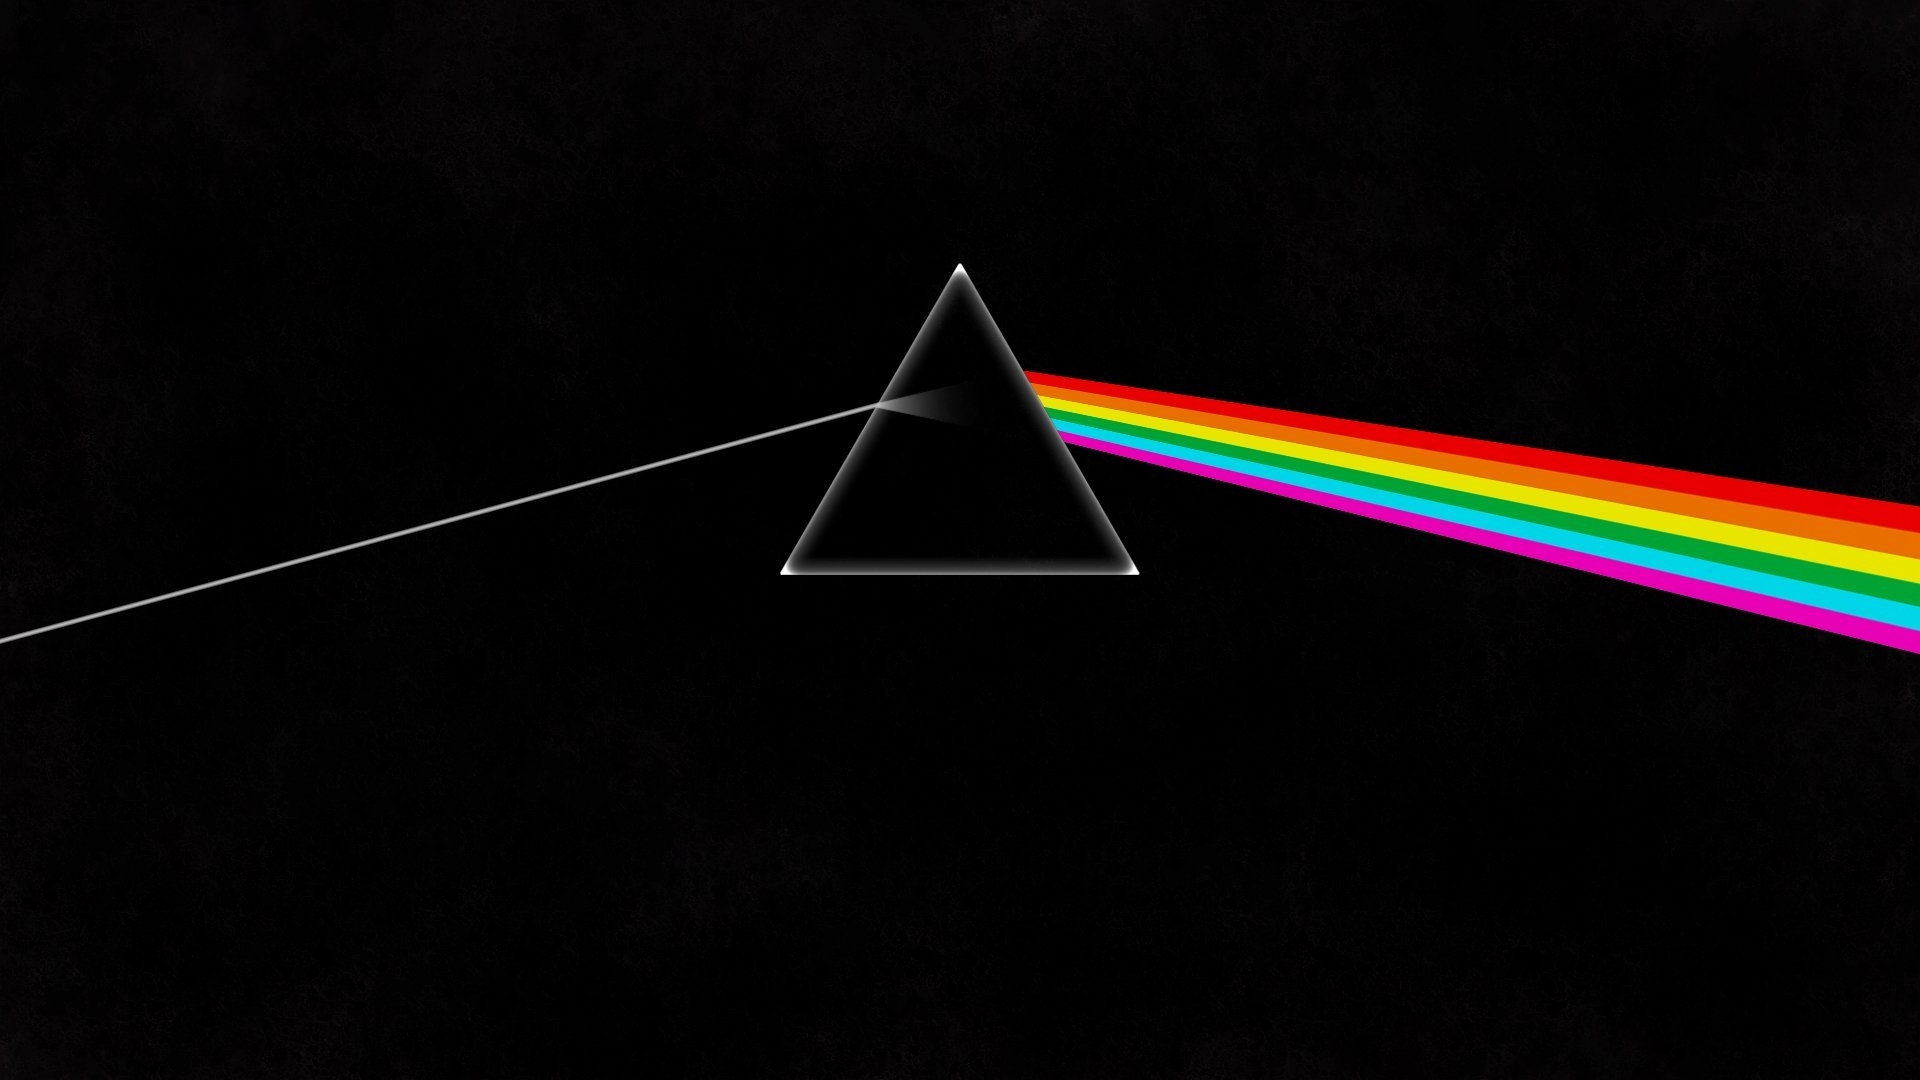 10 New Pink Floyd Wallpaper For Android FULL HD 1080p For PC Desktop